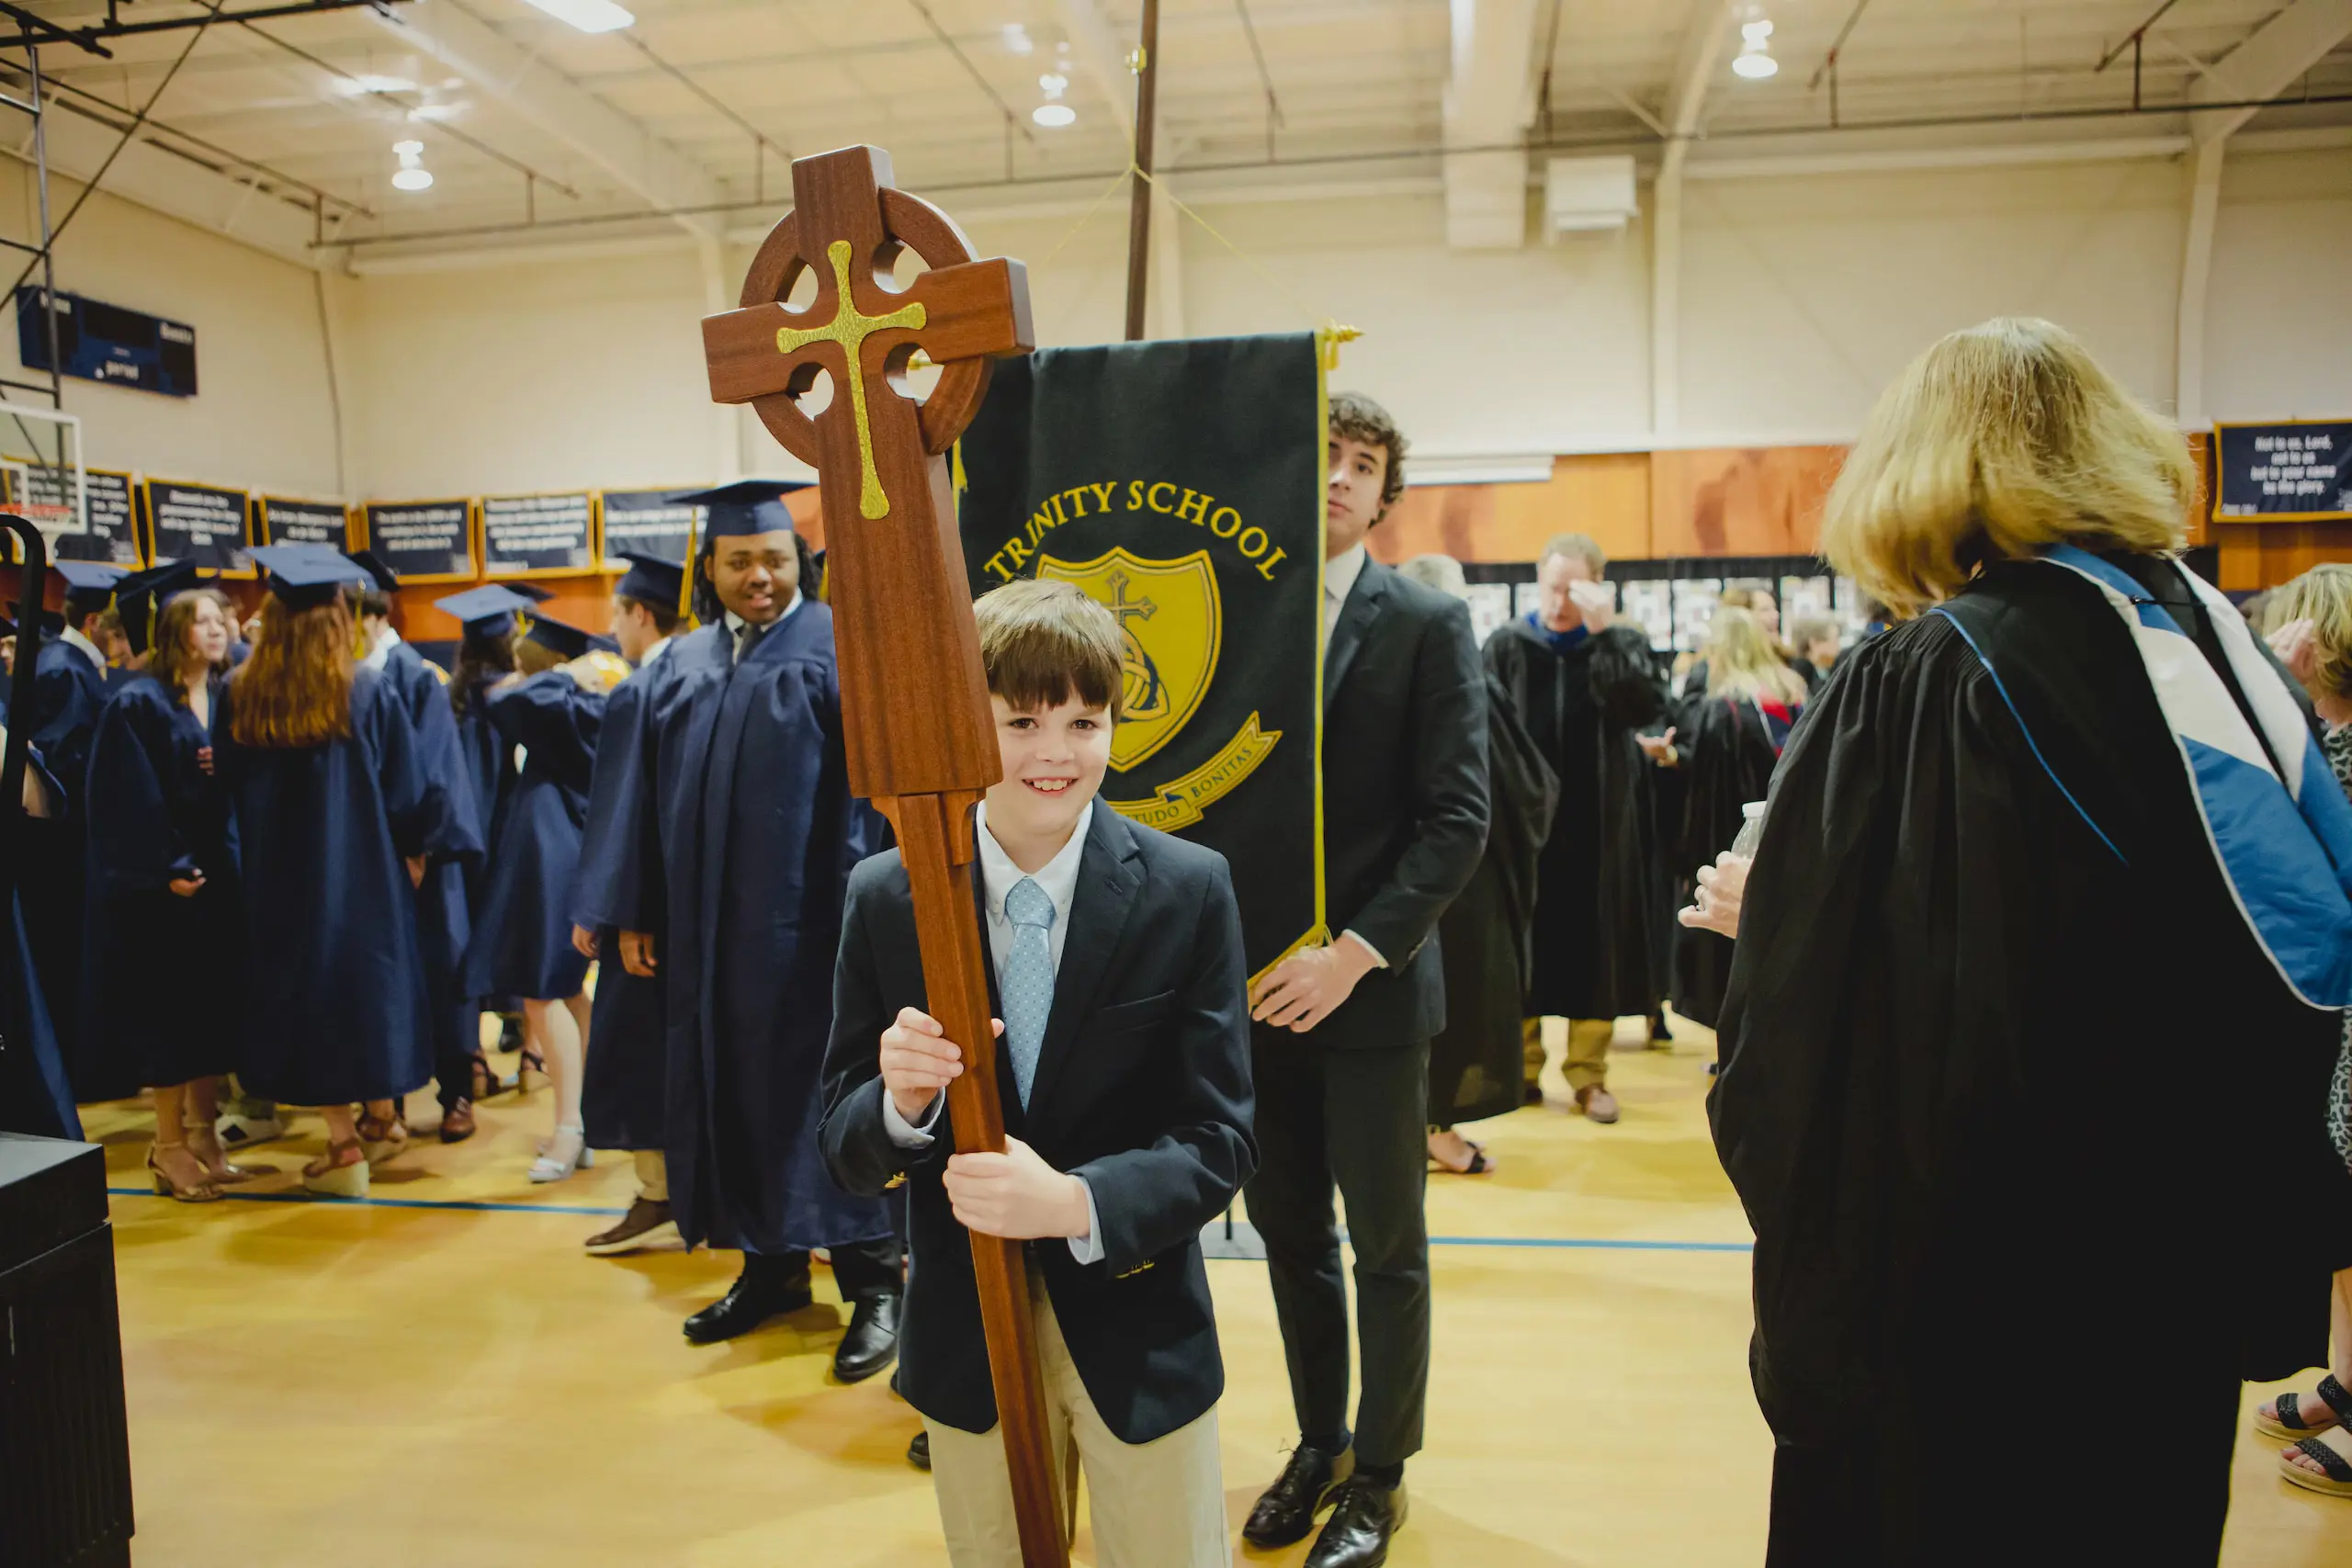 A young Trinity student smiling as he holds a cross during a procession, with high school seniors in graduation gowns following behind in a gymnasium.